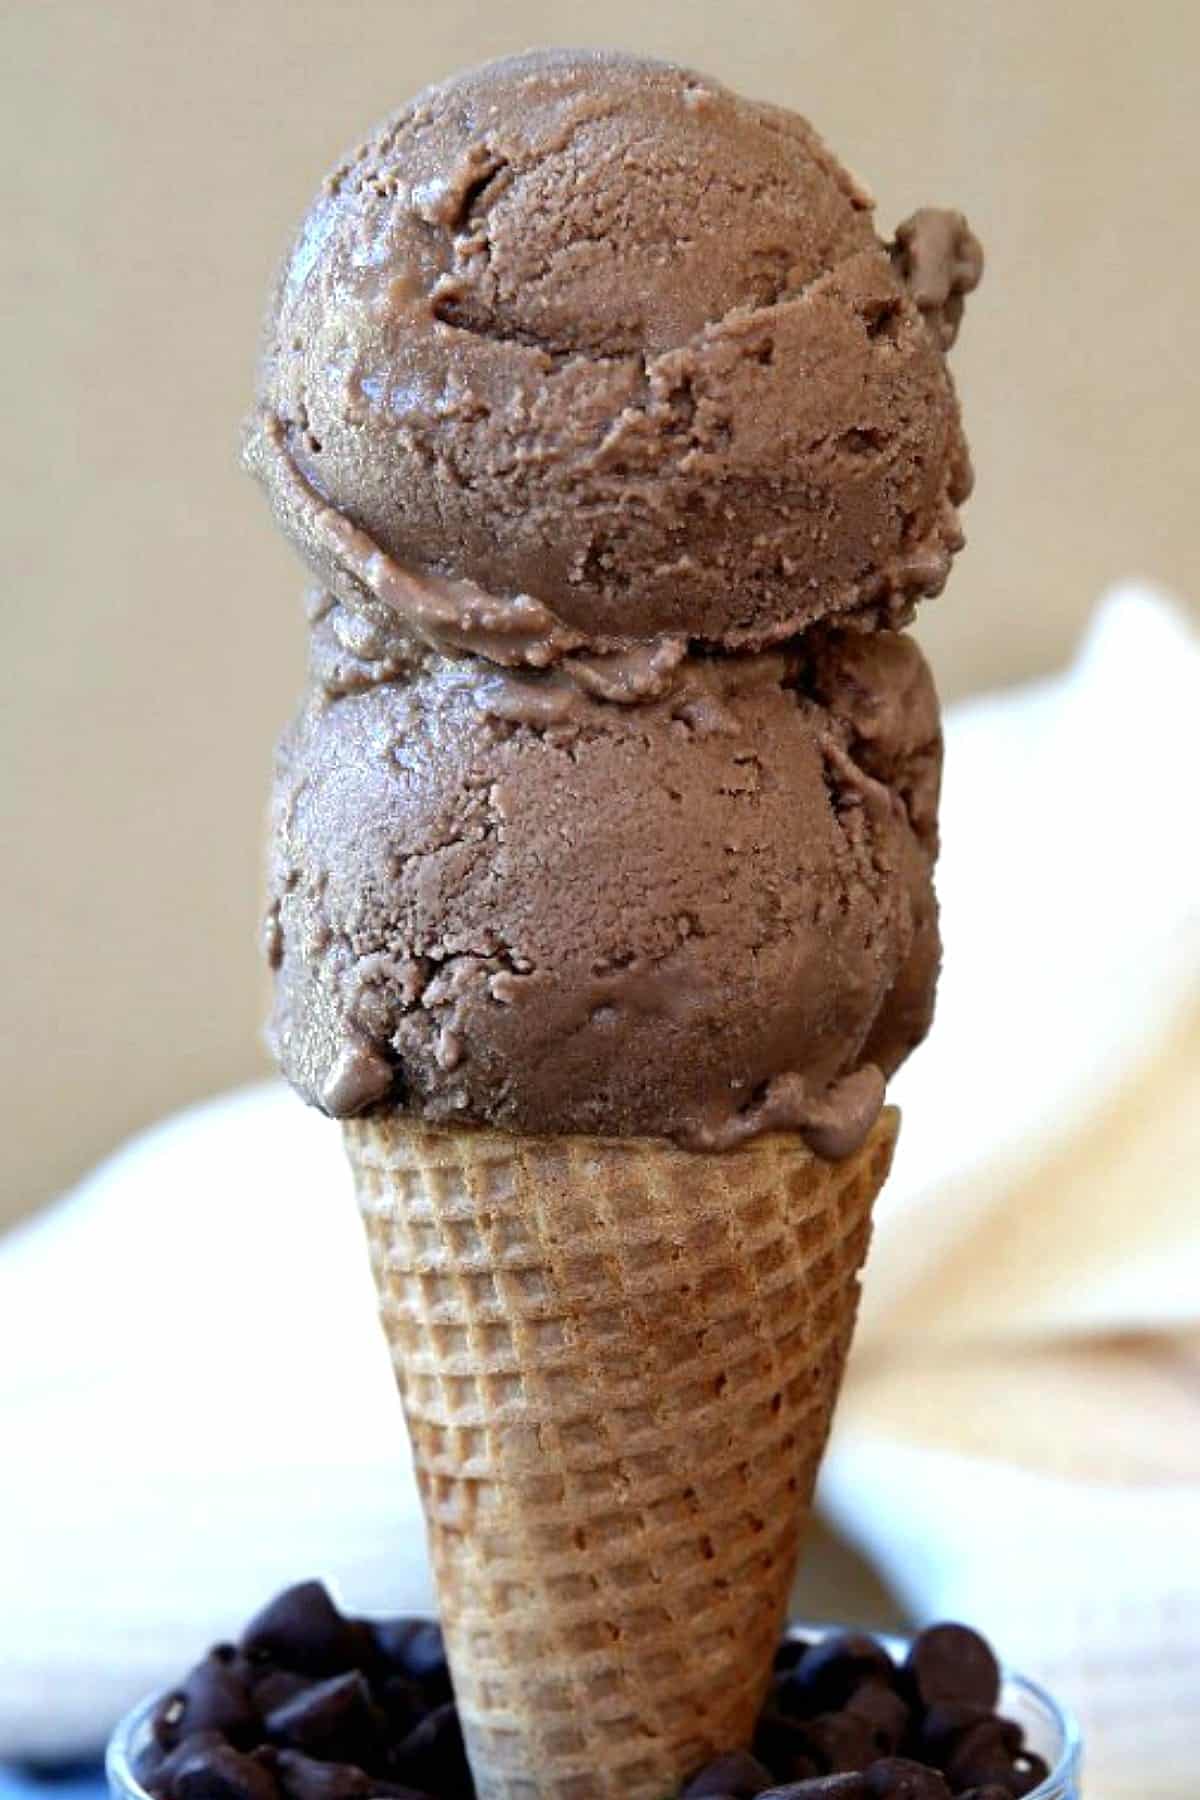 Two scoops of homemade chocolate ice cream on a cone and standing in a bowl of chocolate chips.